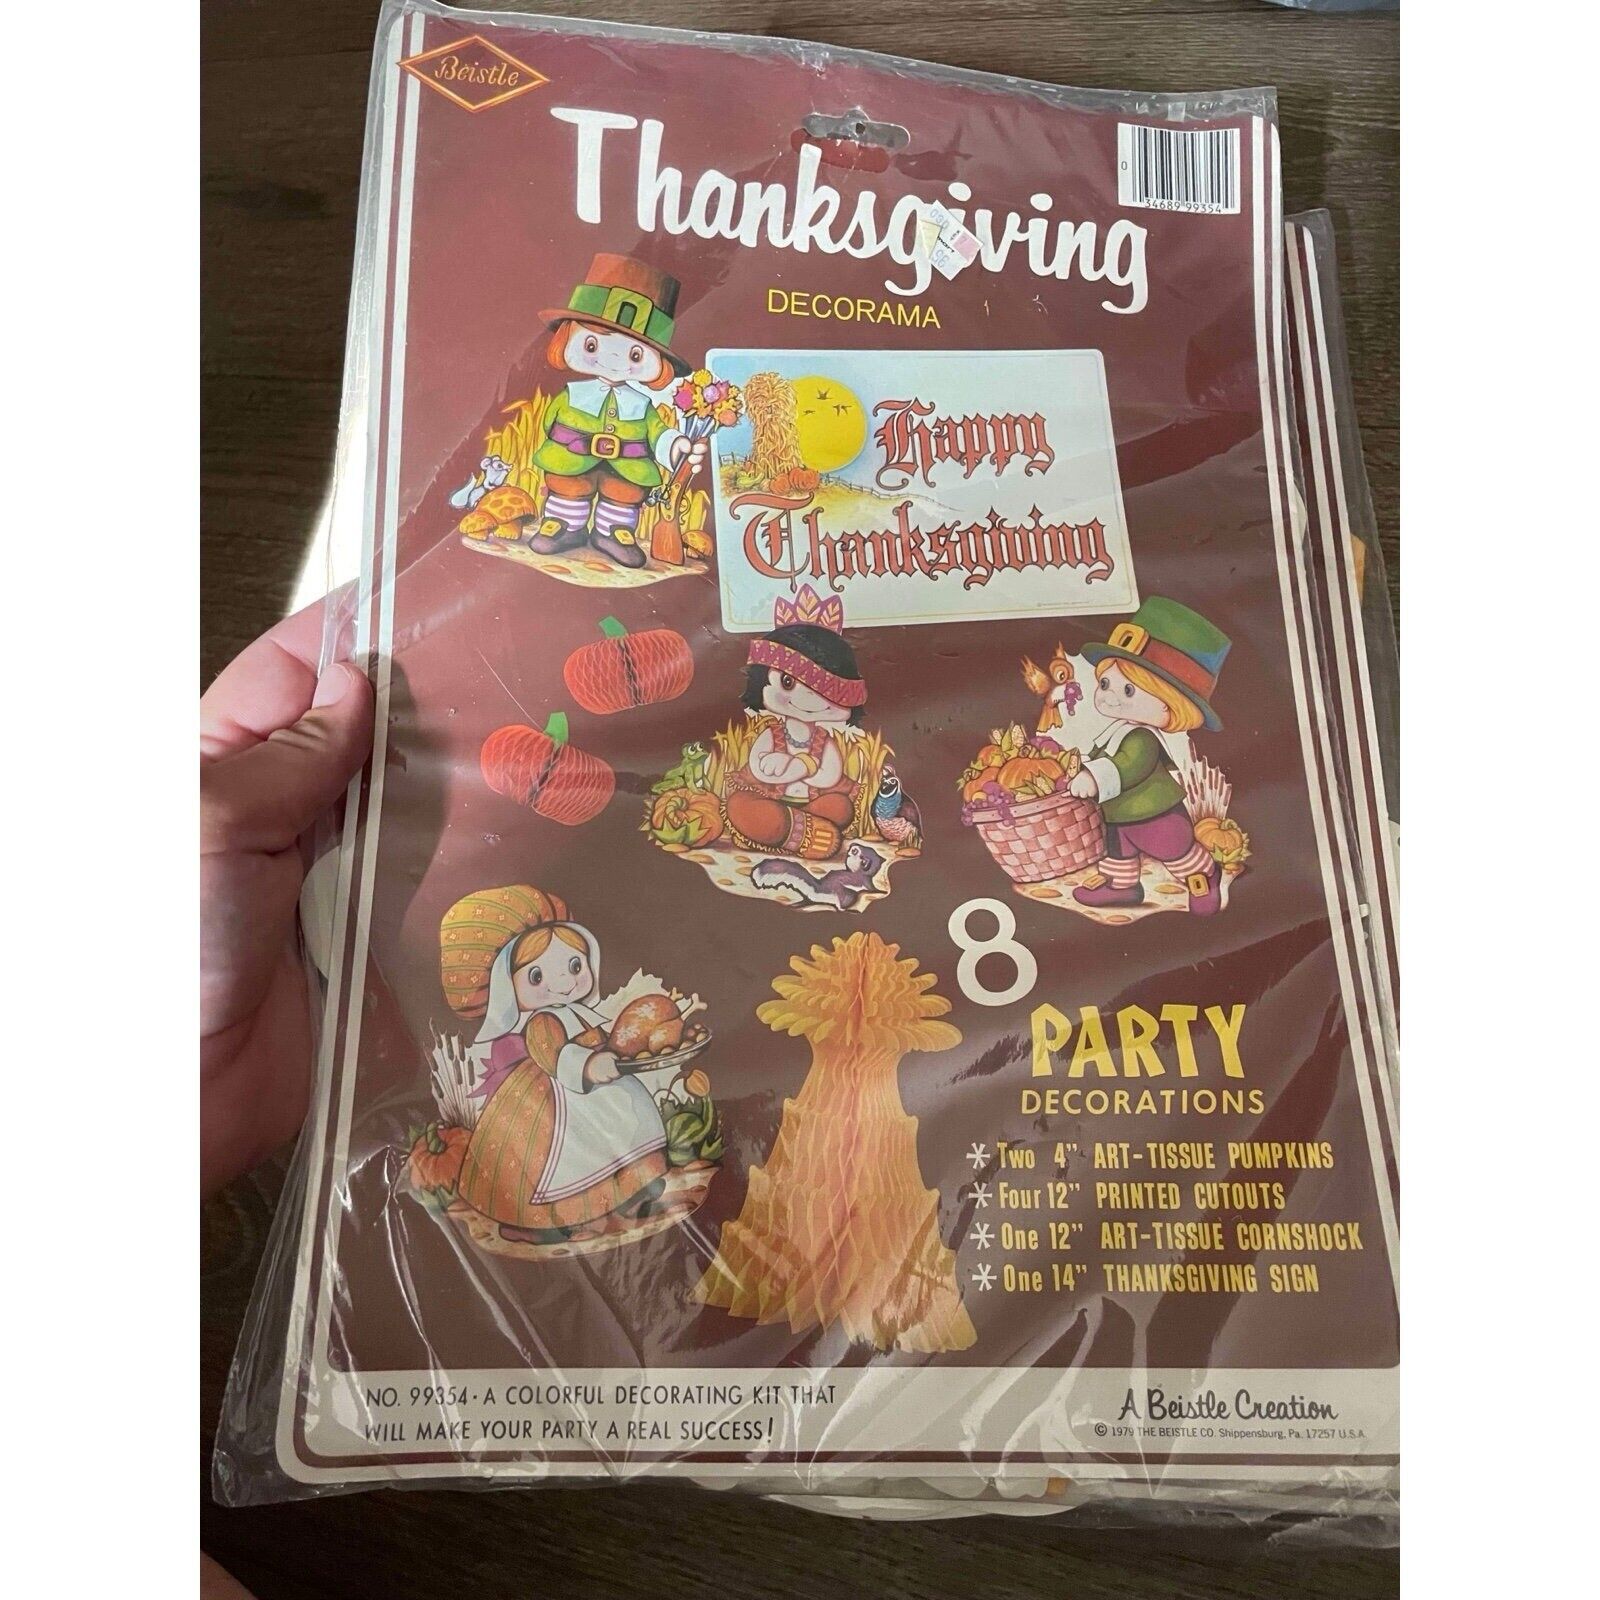 Vintage Beistle Thanksgiving Decorama 8 Fall Decorations Honeycomb Die Cut NOS